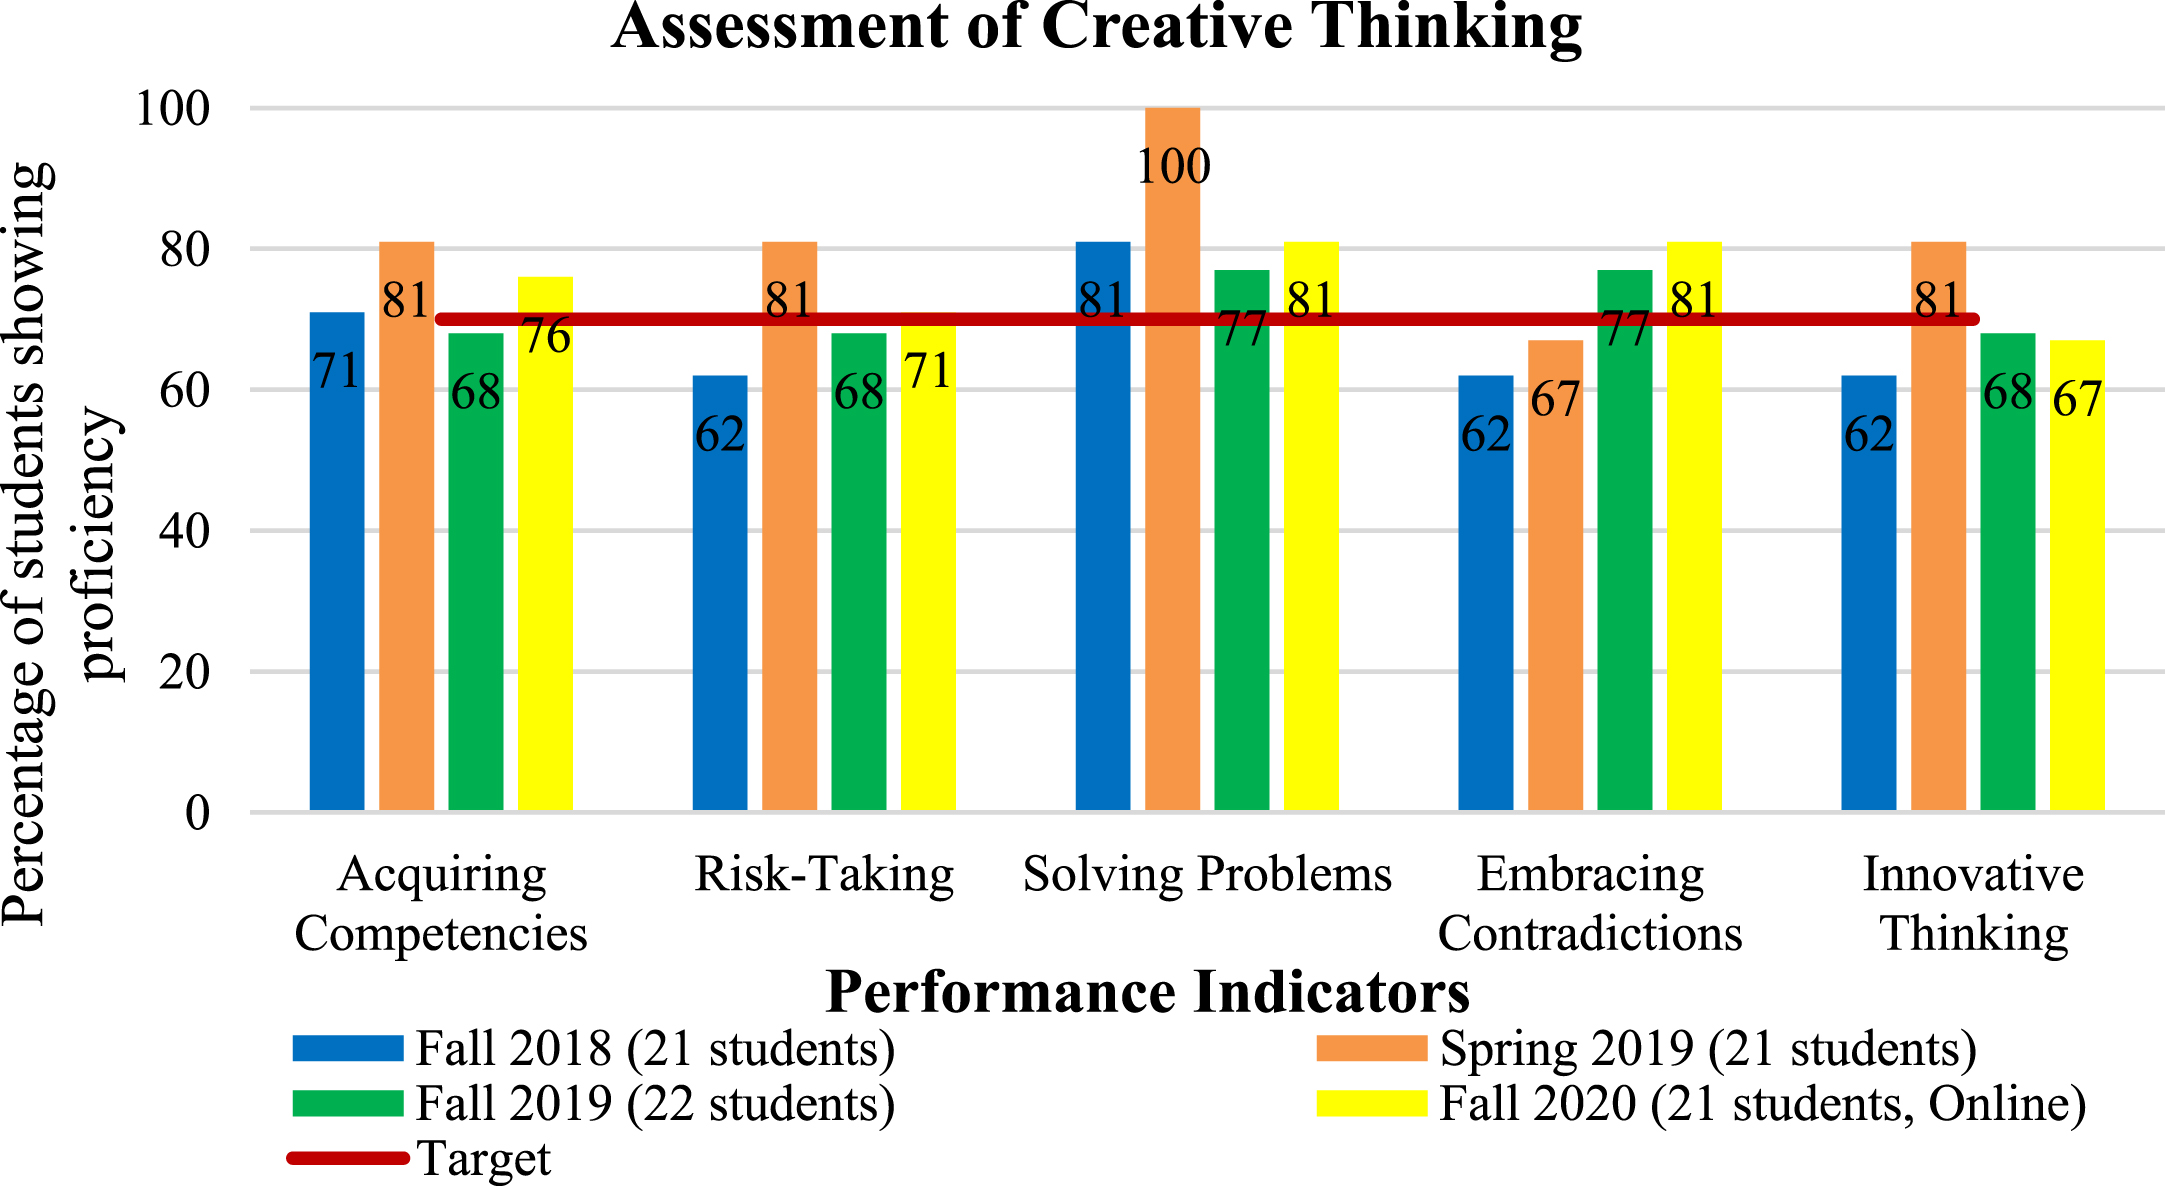 Assessment of students’ creative thinking using project 3: In-person Vs. online.